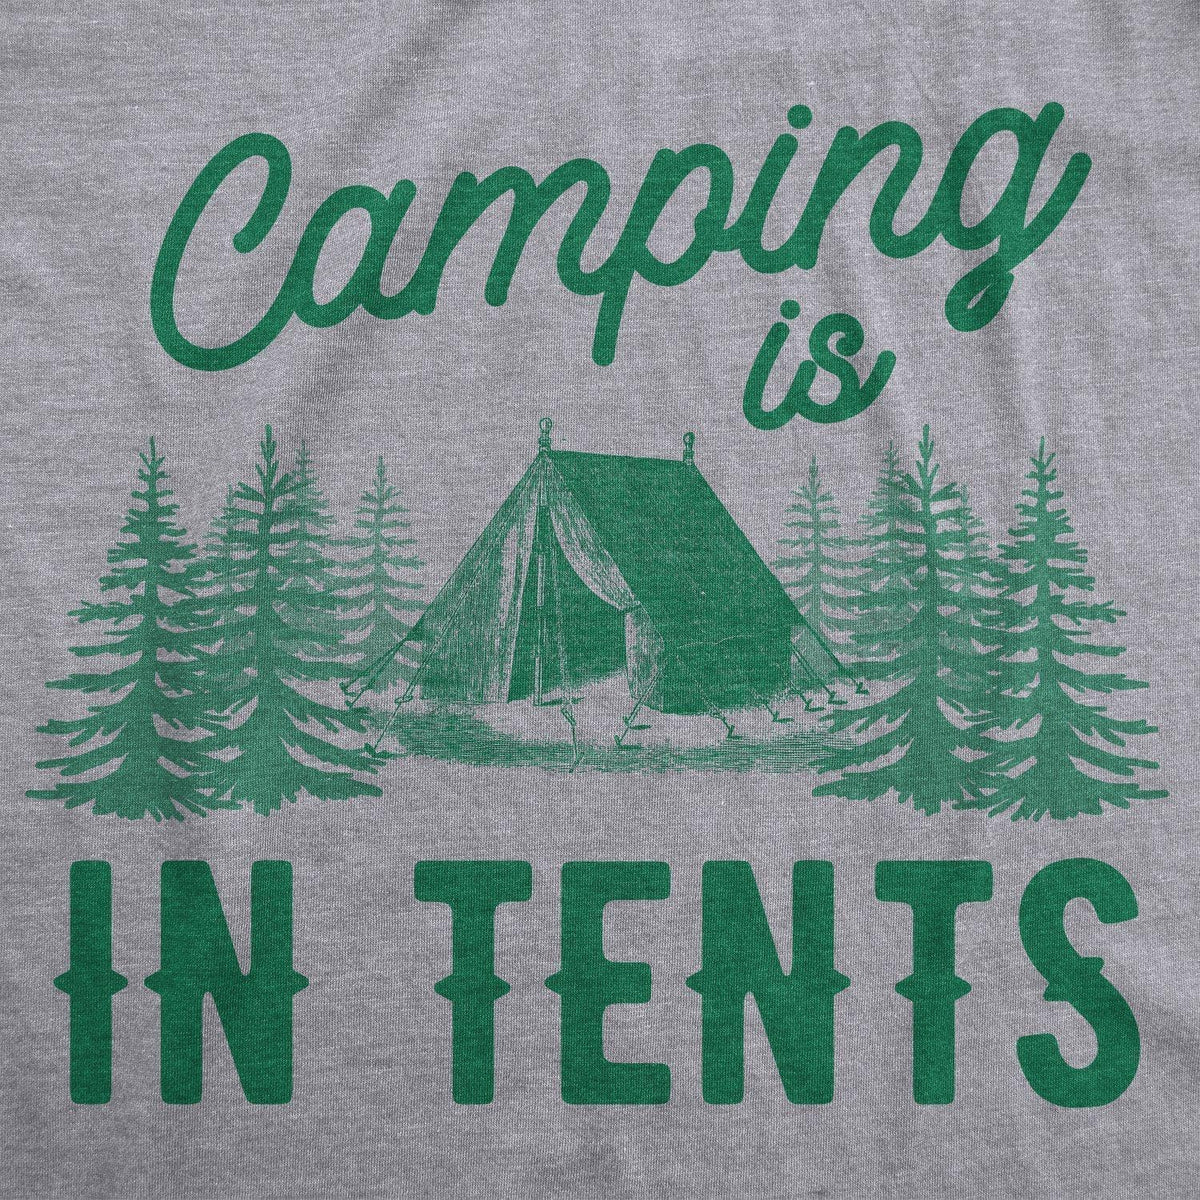 Camping Is In Tents Men&#39;s Tshirt  -  Crazy Dog T-Shirts